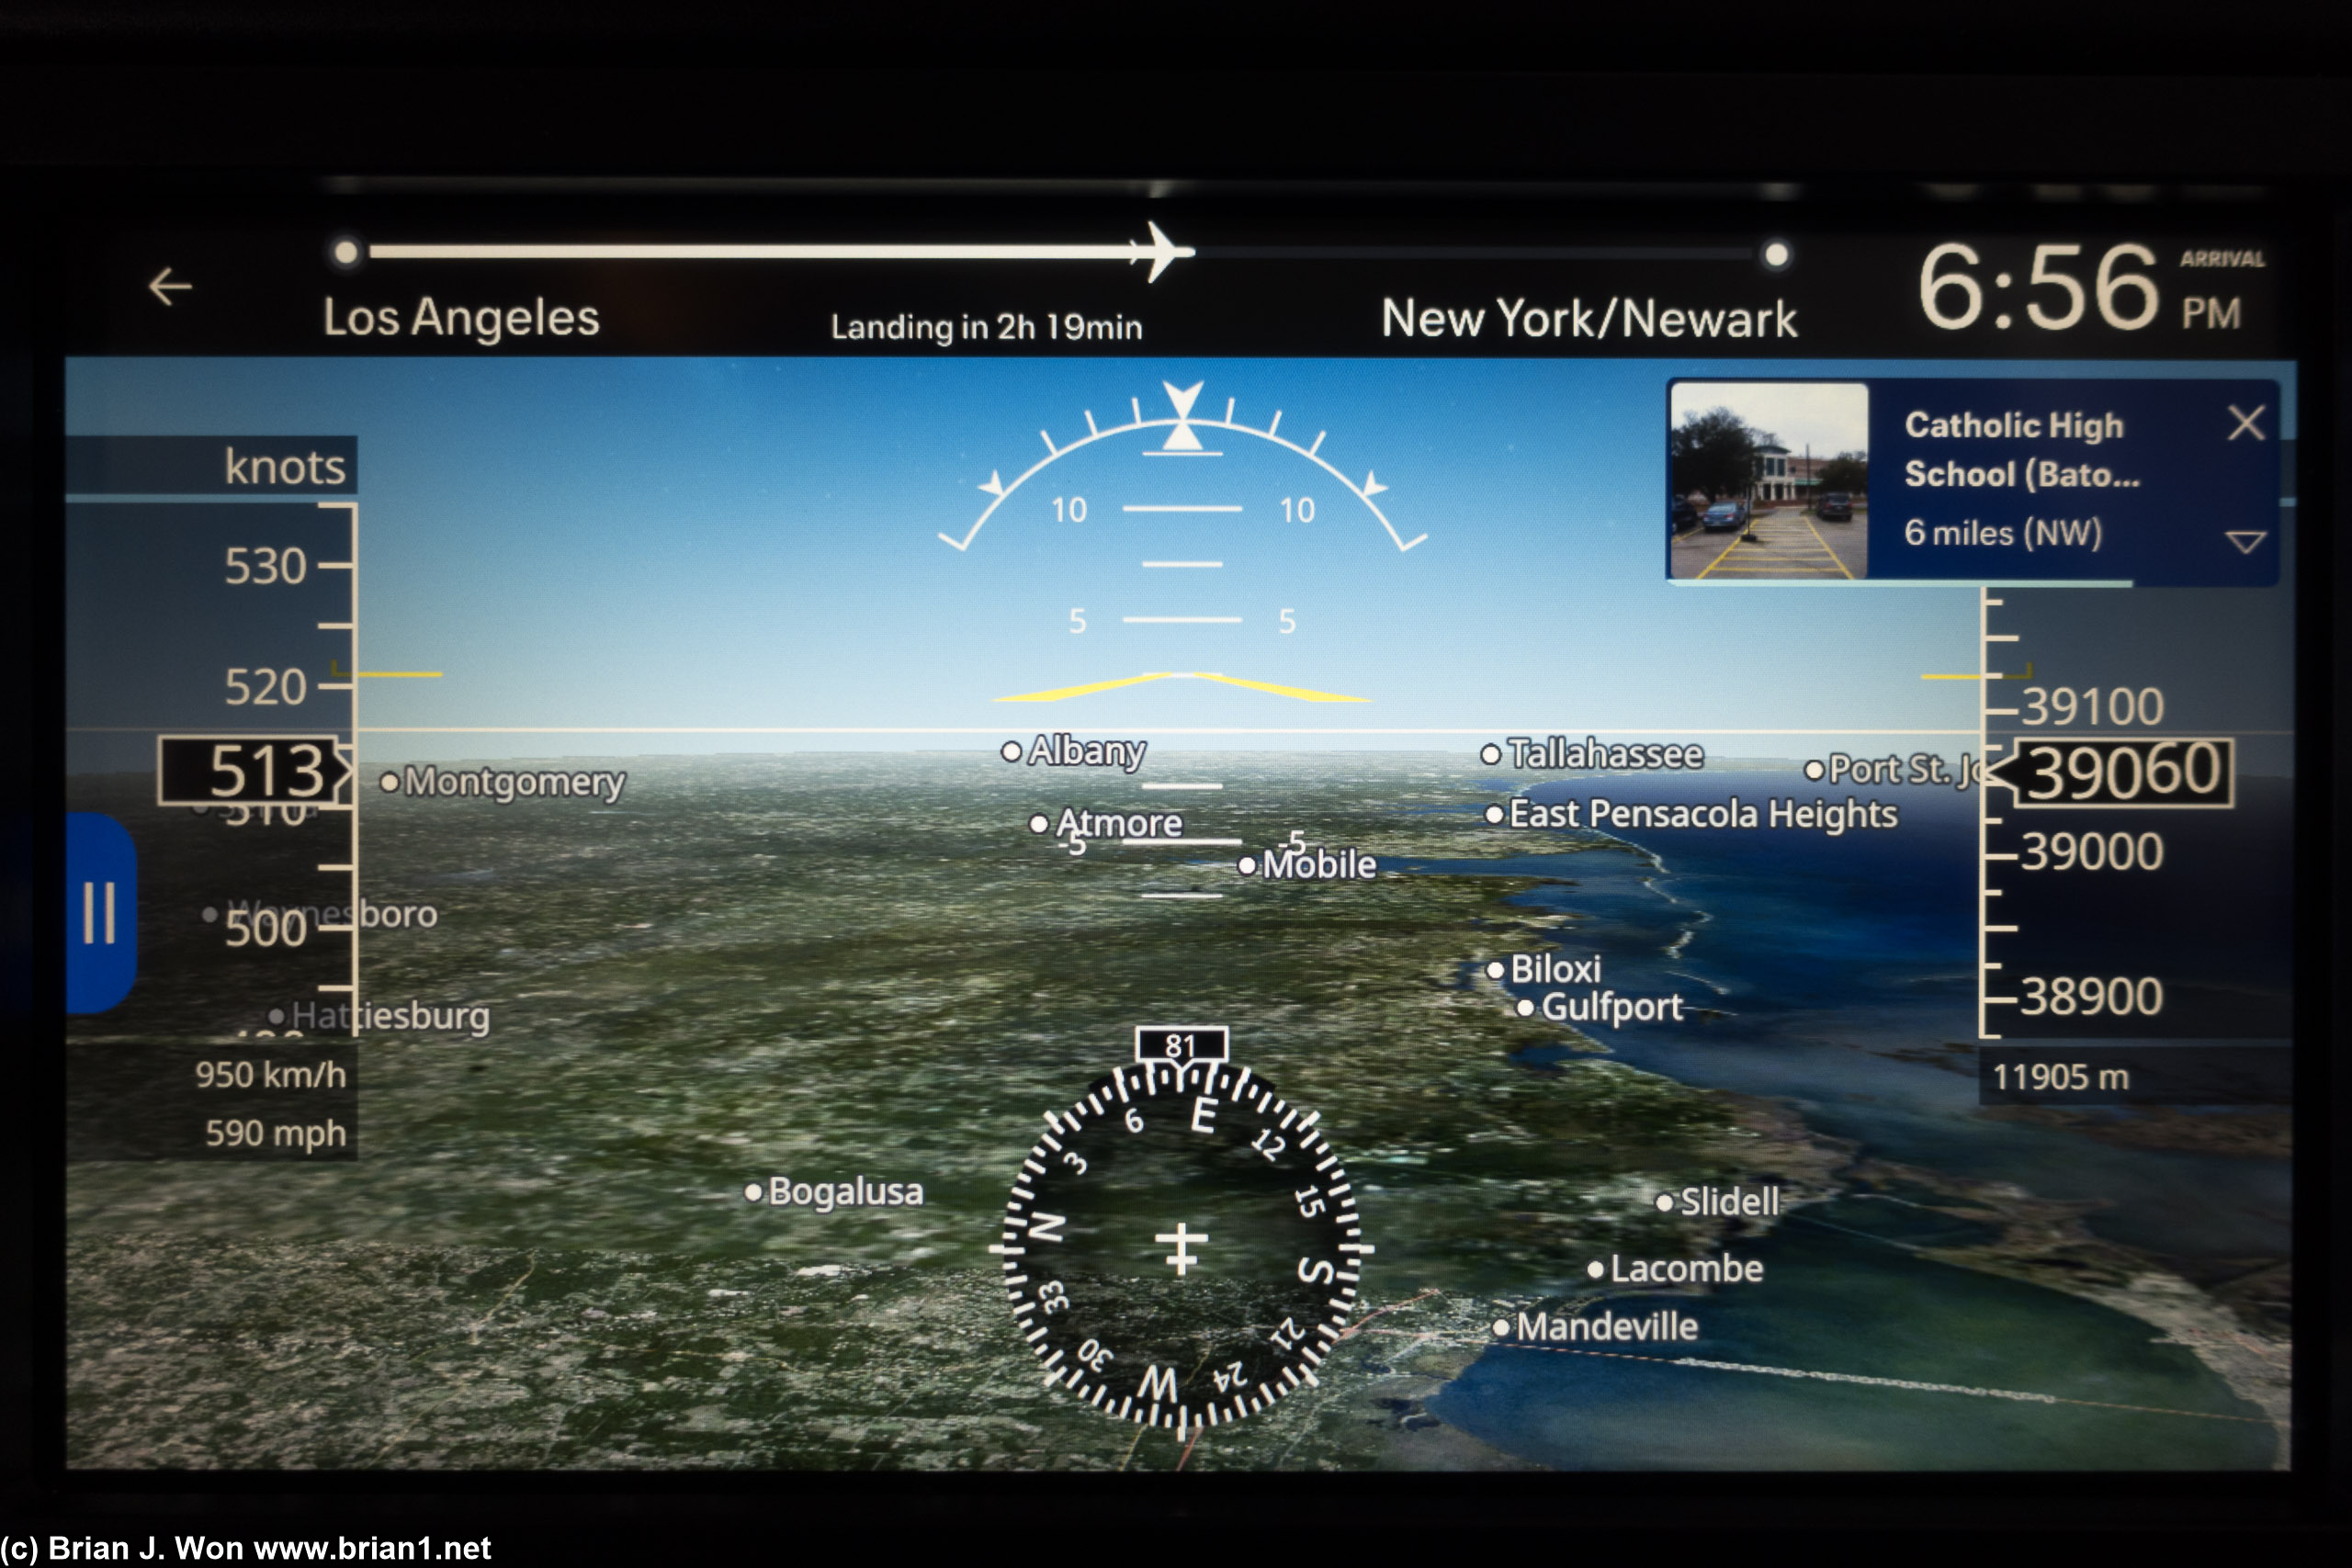 Updated IFE finally has 3D maps. Love it.